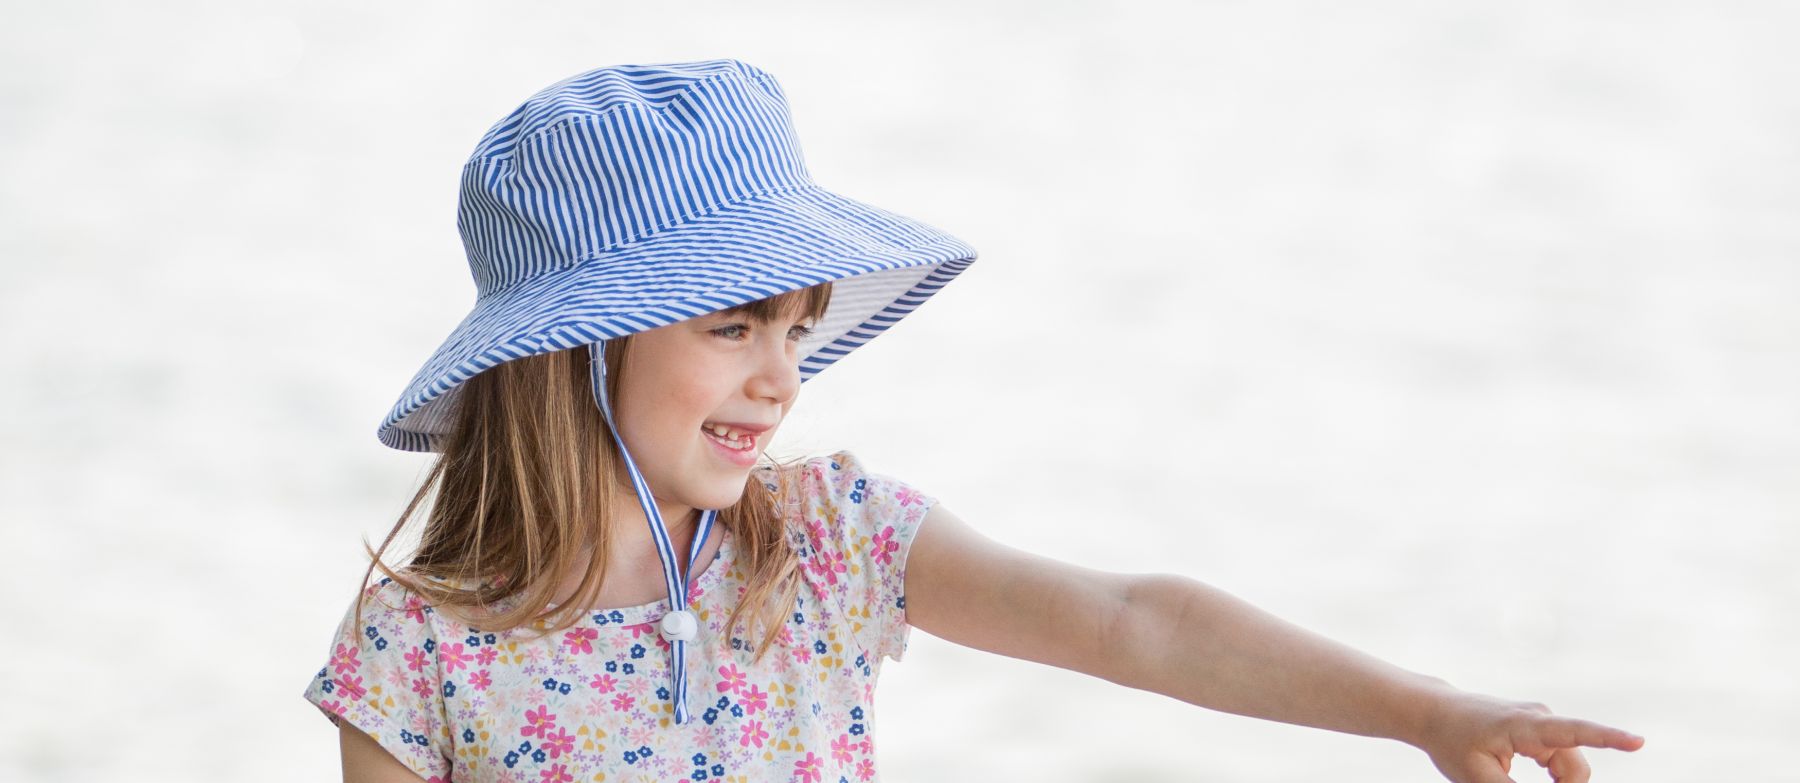 Wide brim kids sun protection hat with chin tie, cordlock, safety breakaway clip-rated UPF50 Excellent sun protection-made in canada by puffin gear-machine washable-cotton prints from classic stripes to liberty of london florals